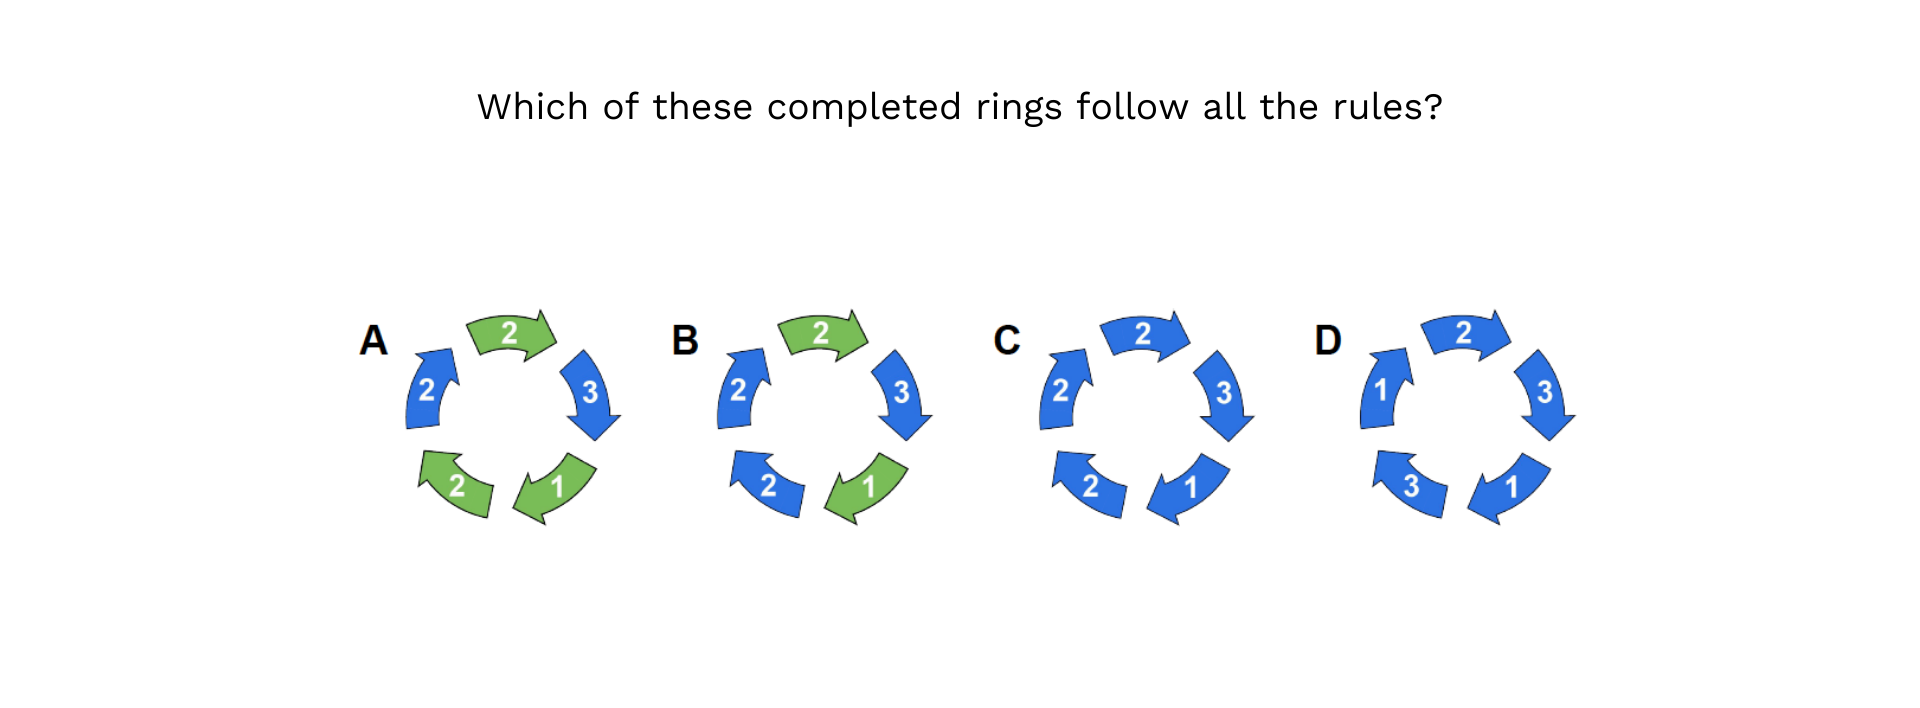 Which of these completed rings follow all the rules?